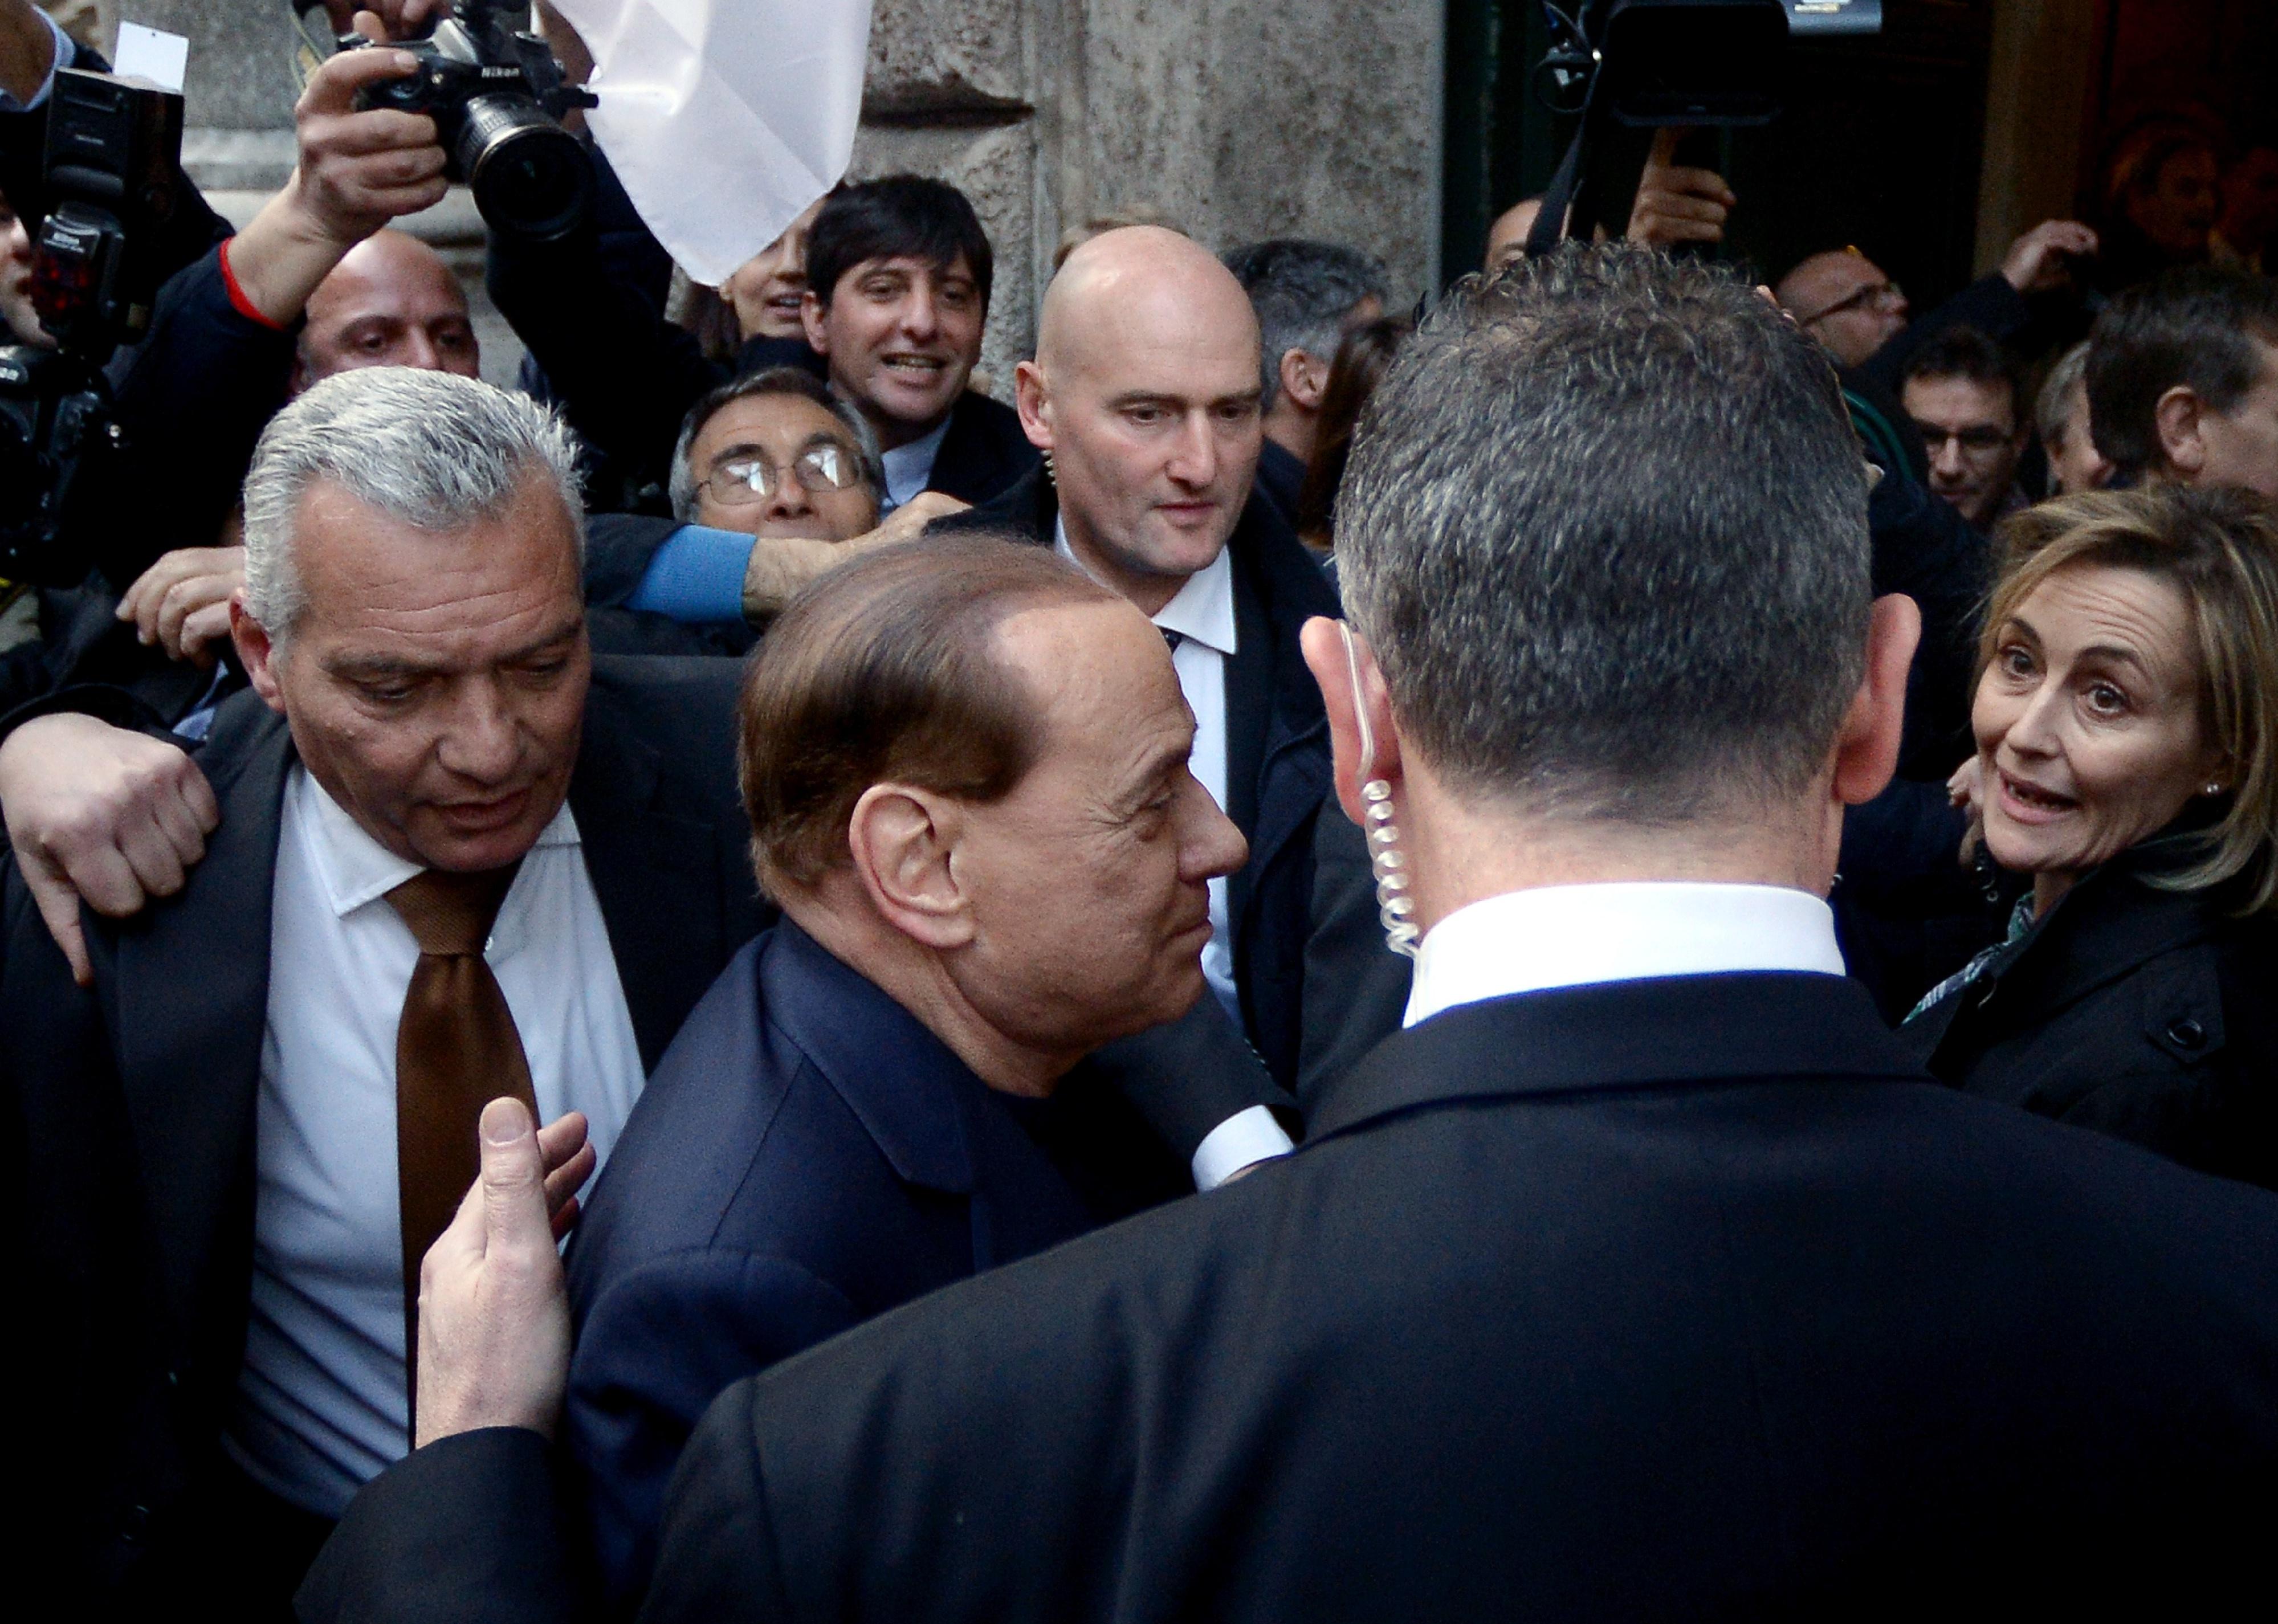 Silvio Berlusconi surrounded by bodyguards arrives at his home in downtown Rome